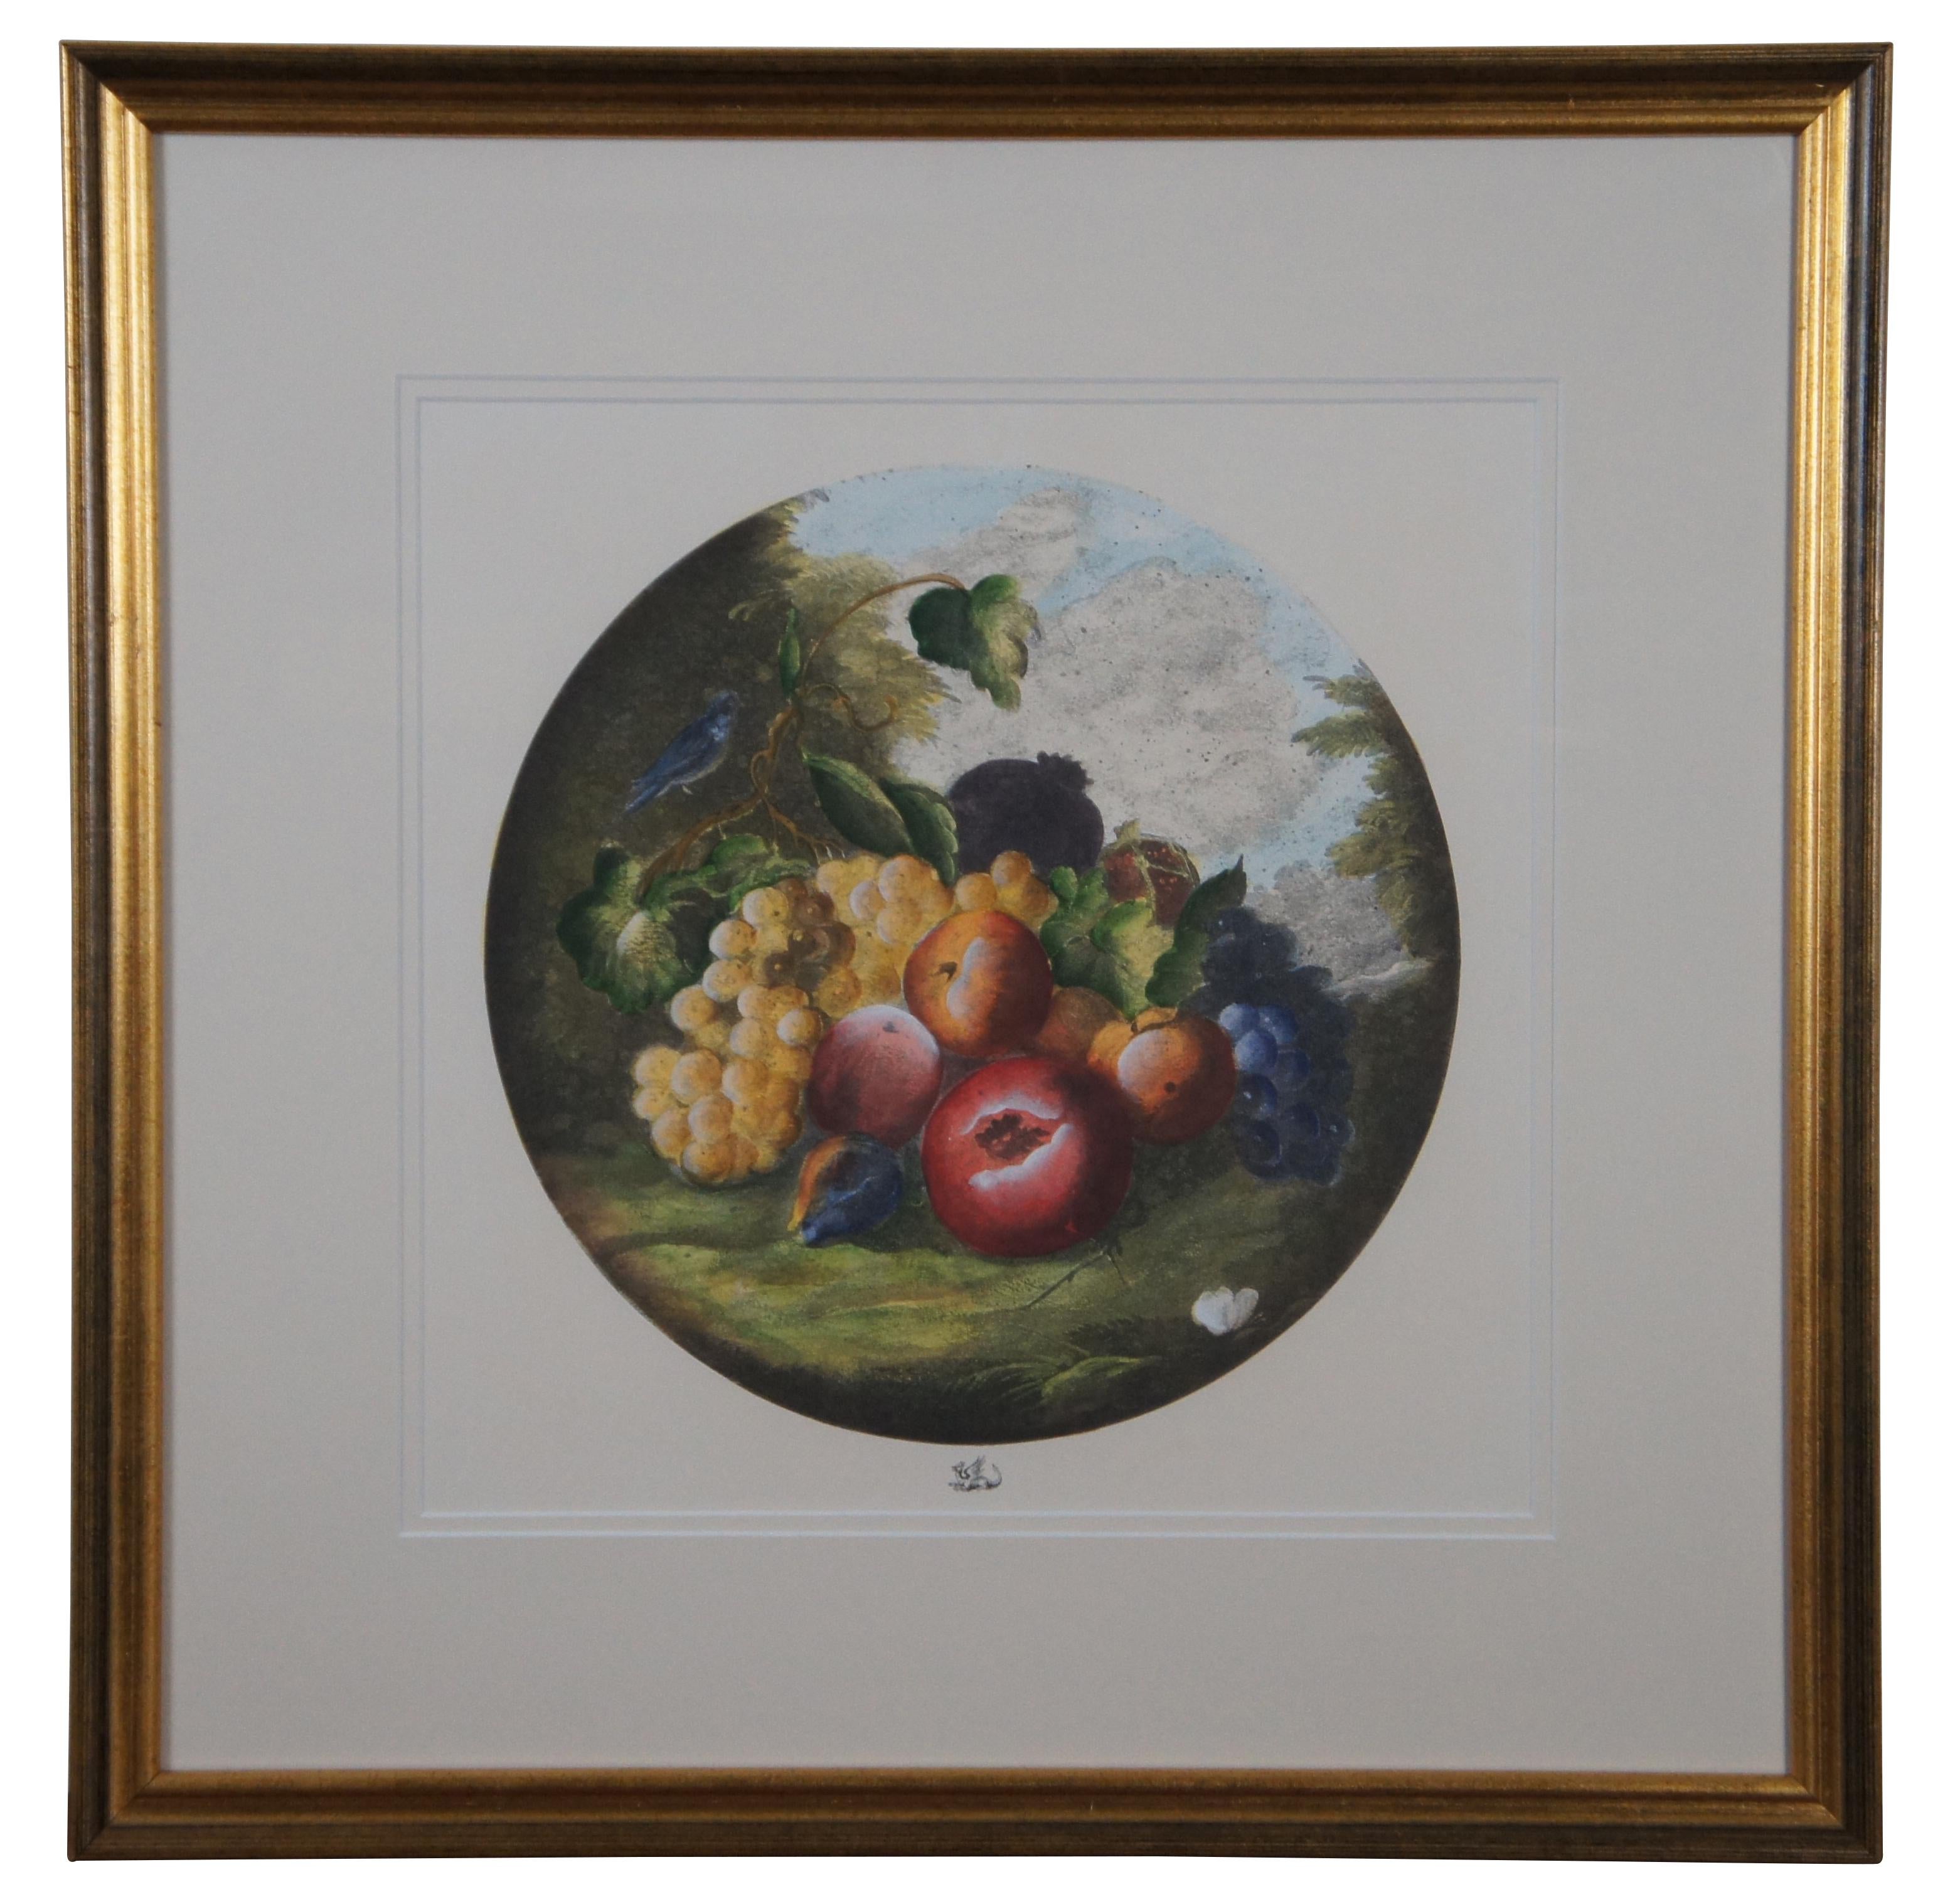 Pair of vintage lithograph prints showing still life of fruit (grapes, peaches, apples, oranges) accented with a grasshopper, a bluebird, and butterflies. Printed as a round image with a makers mark of a dragon reclined beneath.


22” x 1” x 22”